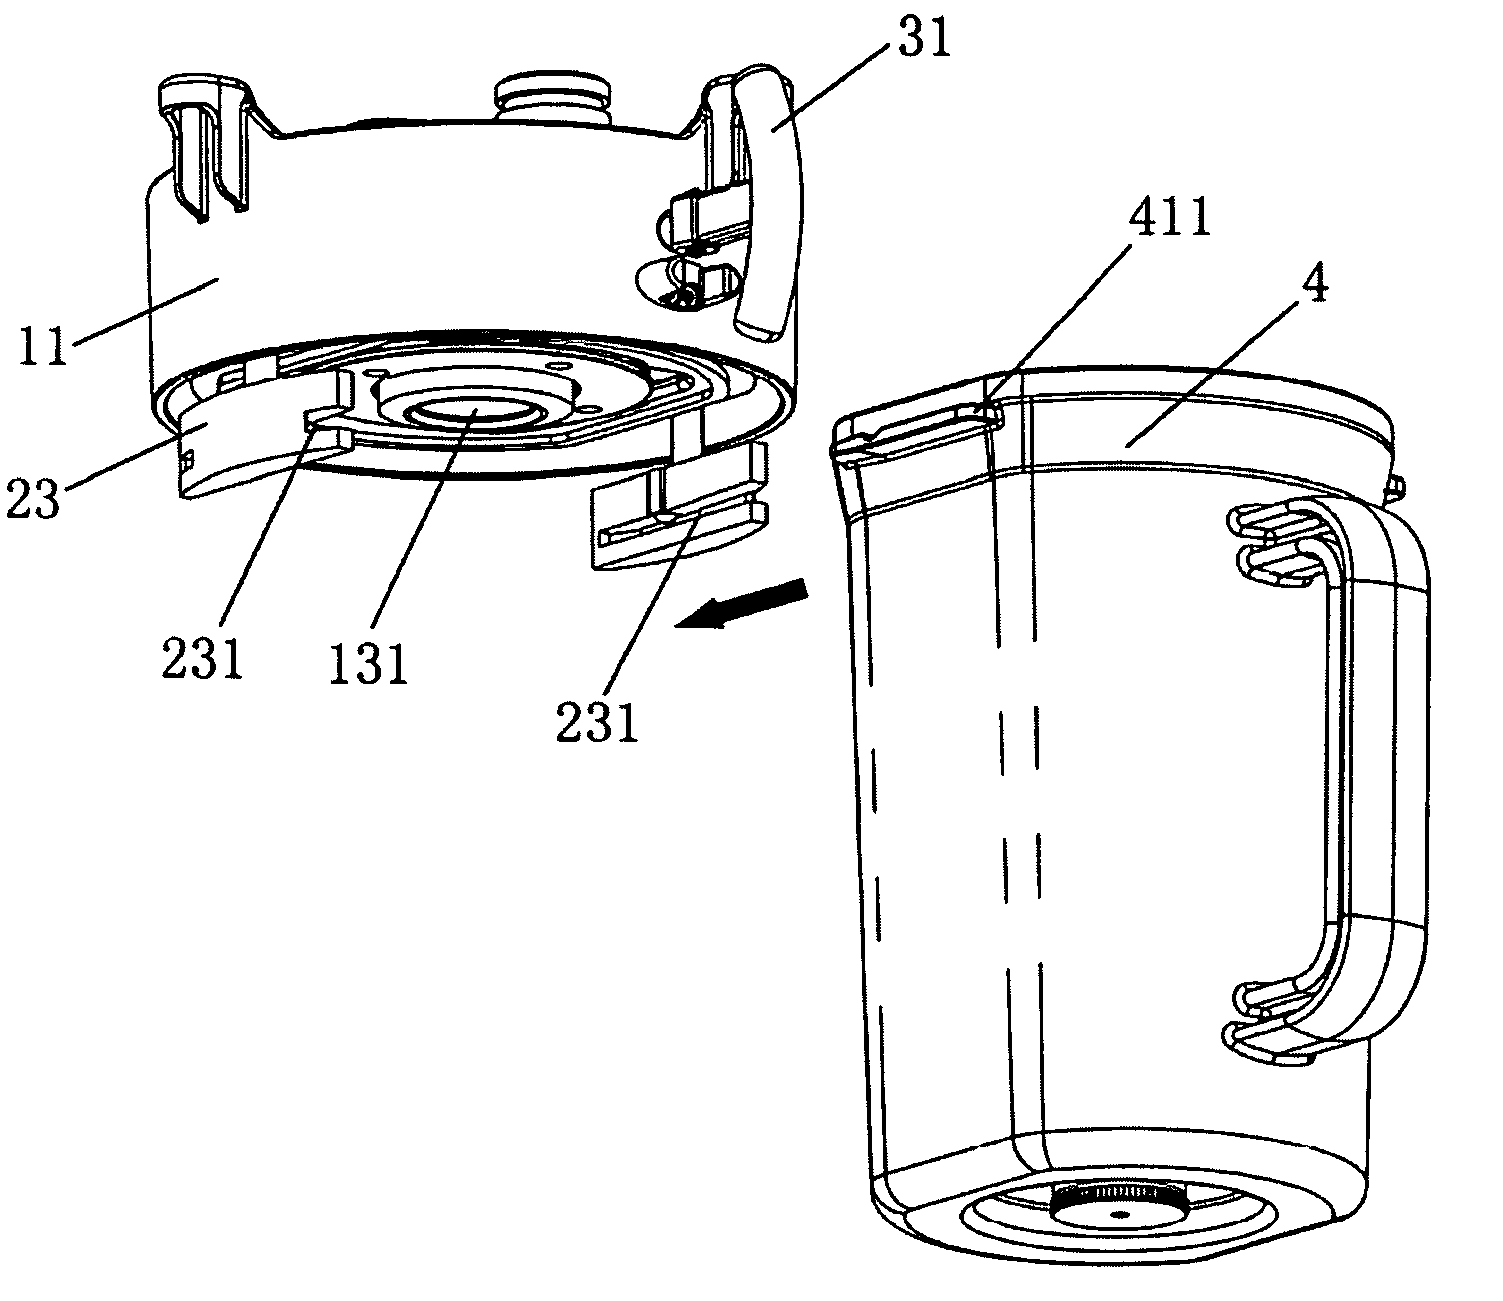 Apparatus for installing or uninstalling carbon dioxide absorbent canister